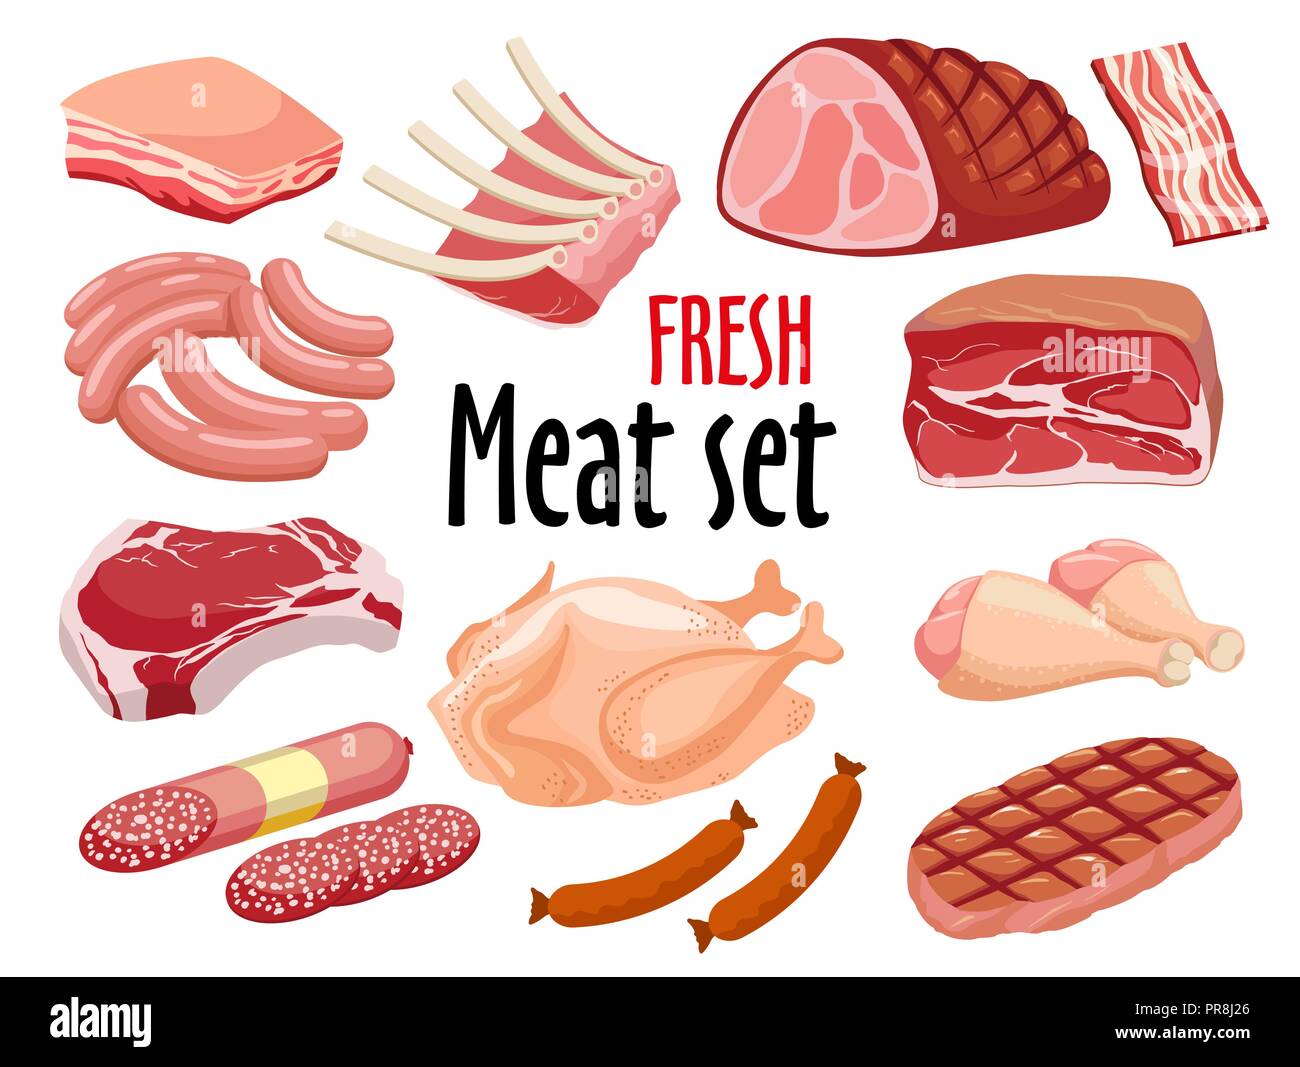 Meat set vector. Fresh meat icons set. Stock Vector